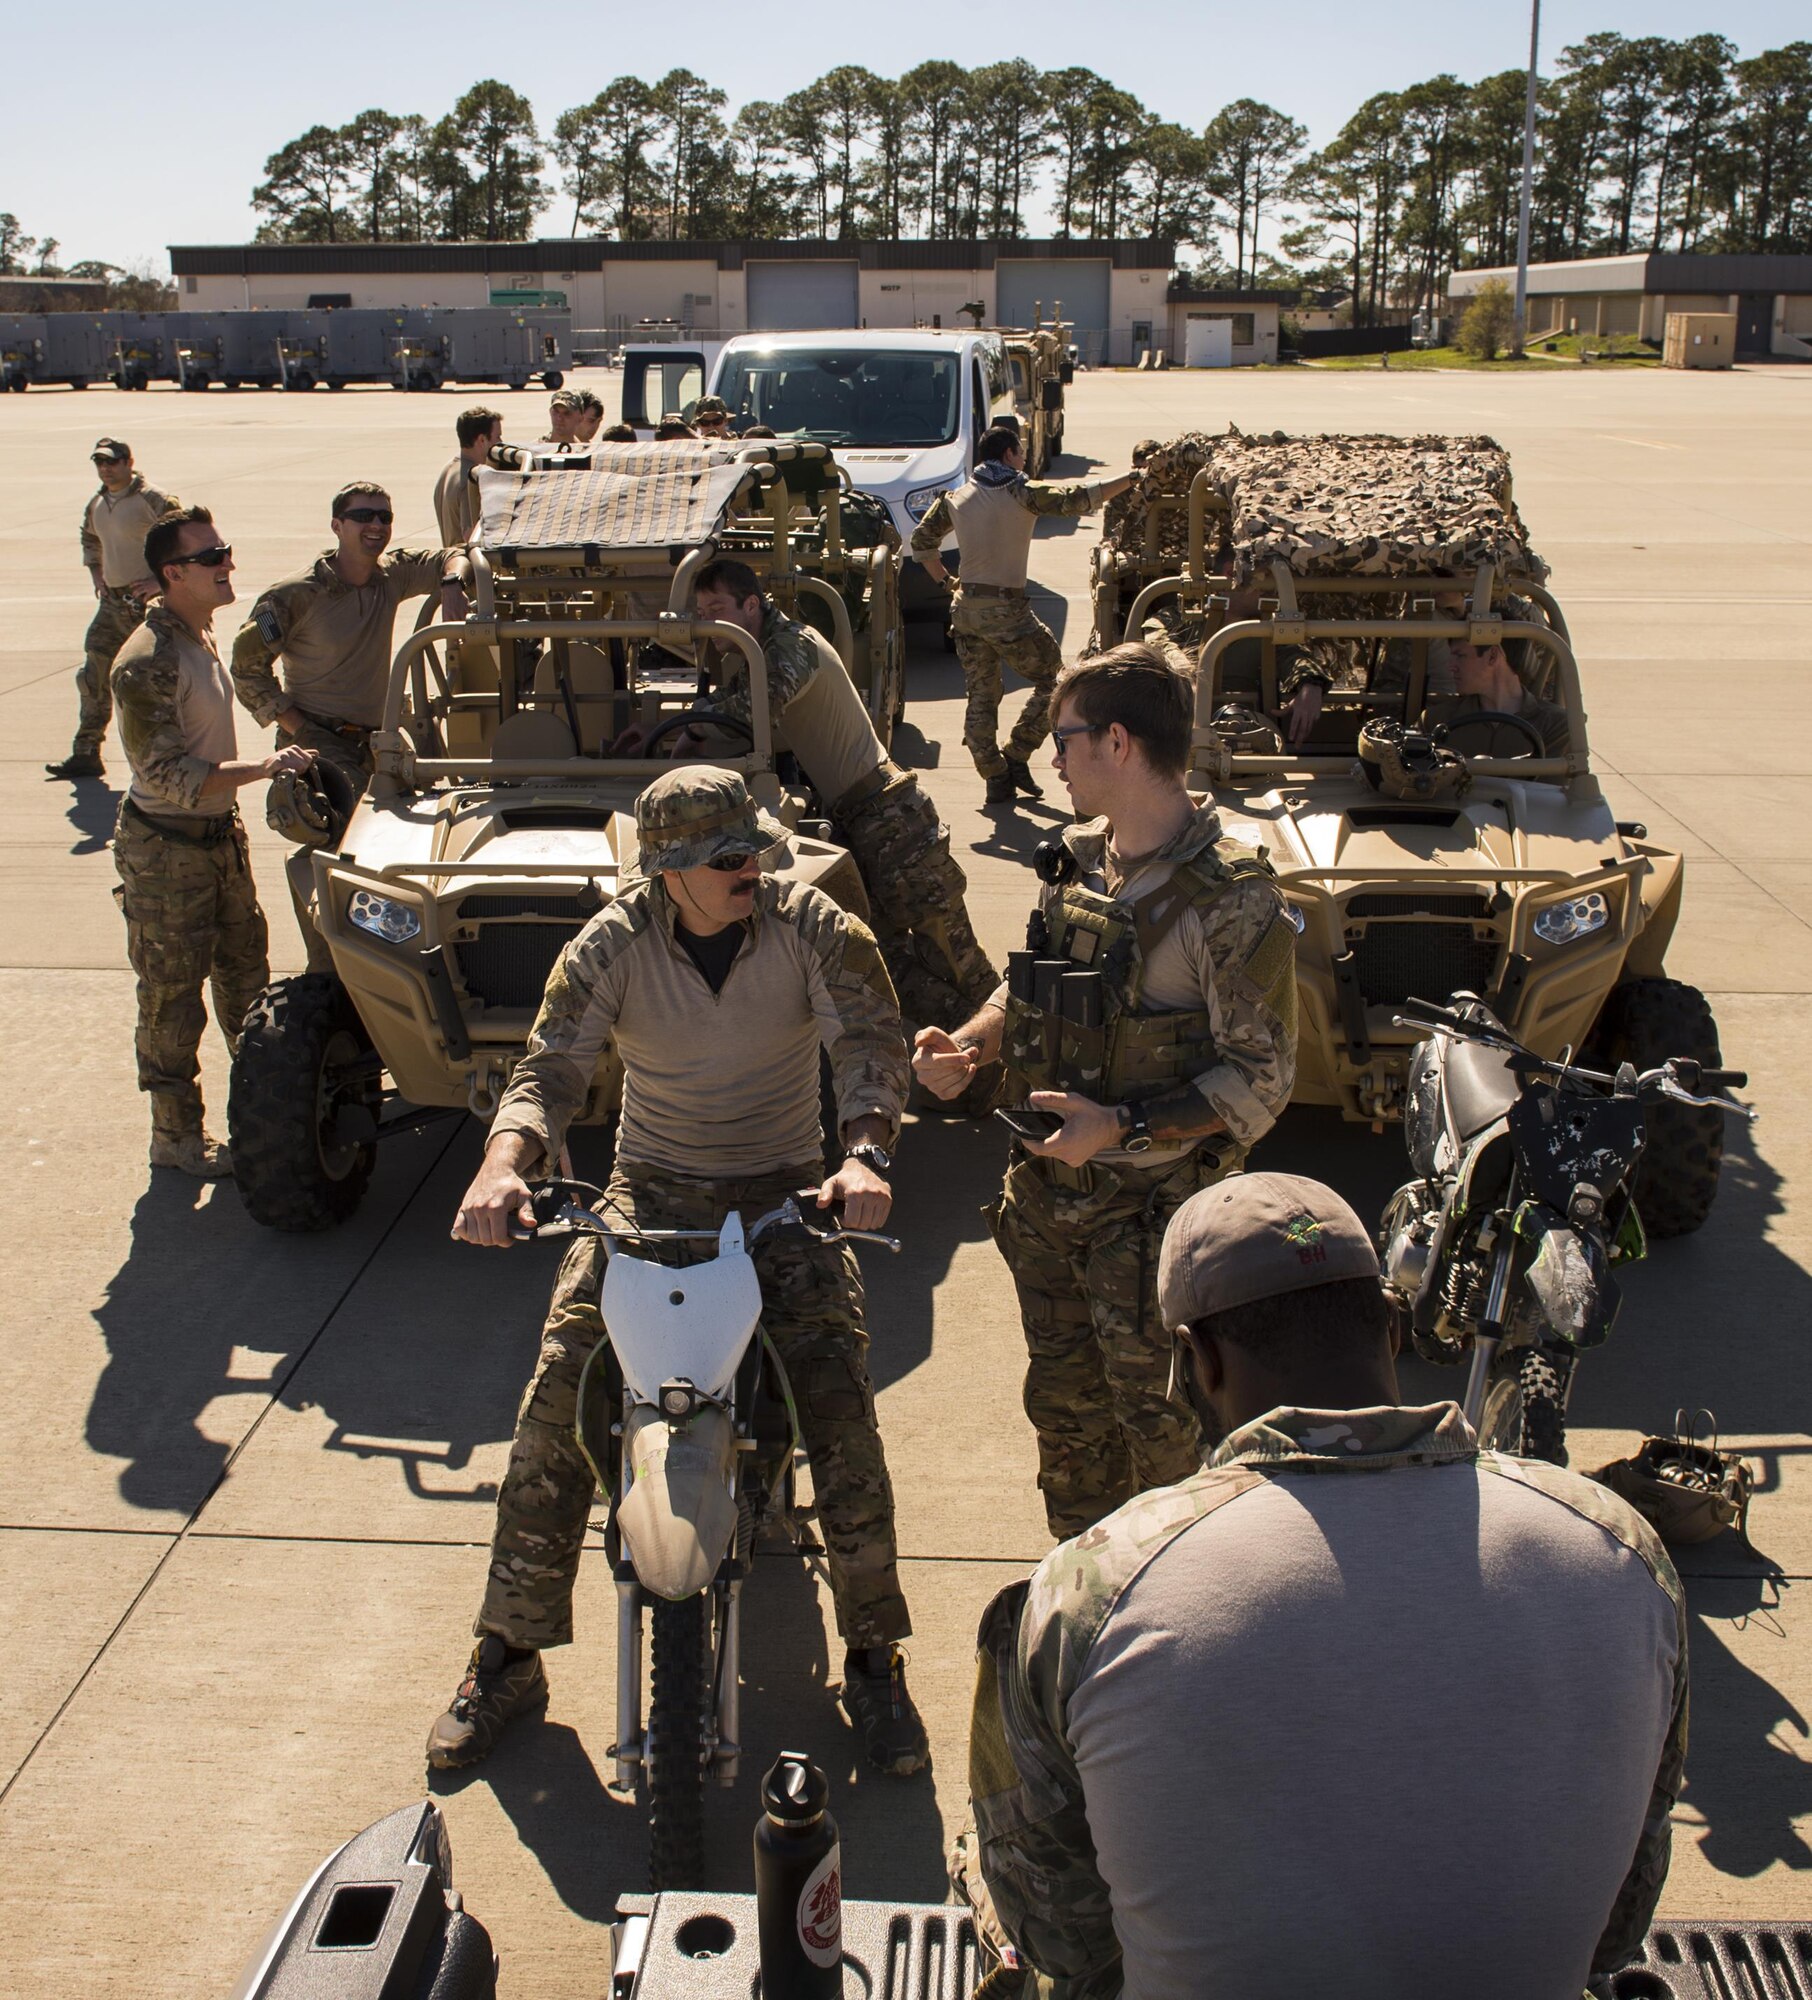 U.S. Air Force Airmen from the 24th Special Operations Wing form a line before entering an MC-130J Commando II while participating in a static load training during Exercise Emerald Warrior at Hurlburt Field, Fla., Feb. 26, 2017.  Emerald Warrior is the largest joint special operations exercise. U.S. Special Operations Command forces train to respond to various threats across the spectrum of conflict. (U.S. Air Force photo by Senior Airman Erin Piazza)